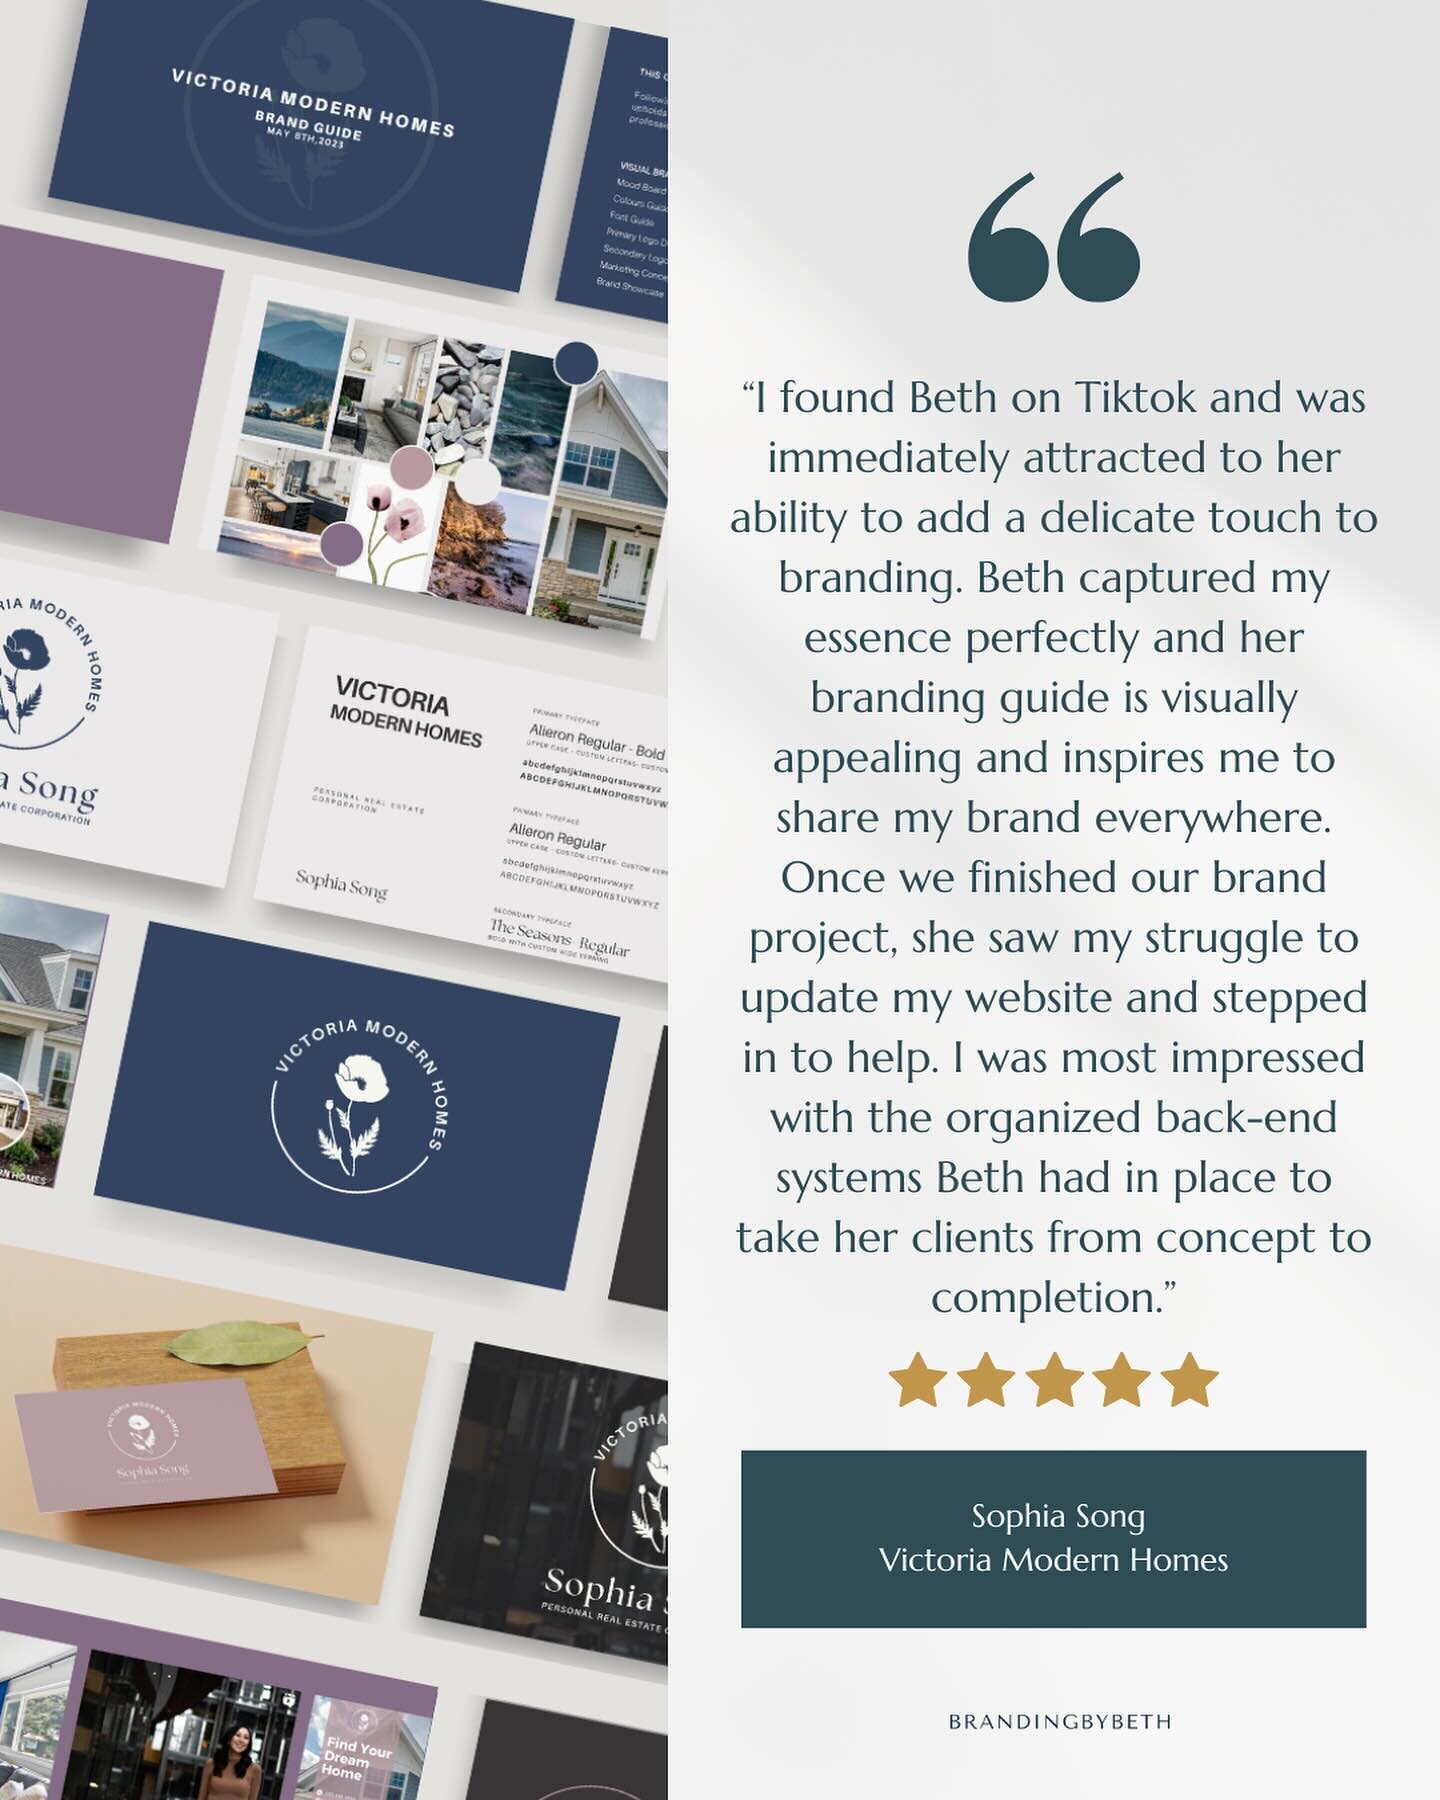 Kind words from kind people! 😁 @sophiasong.yyjrealtor 

➡️ After finalizing the beautiful Victoria Modern Homes brand guide, we seamlessly transitioned to crafting their website. The integration of new brand standards ensures your clients a positive